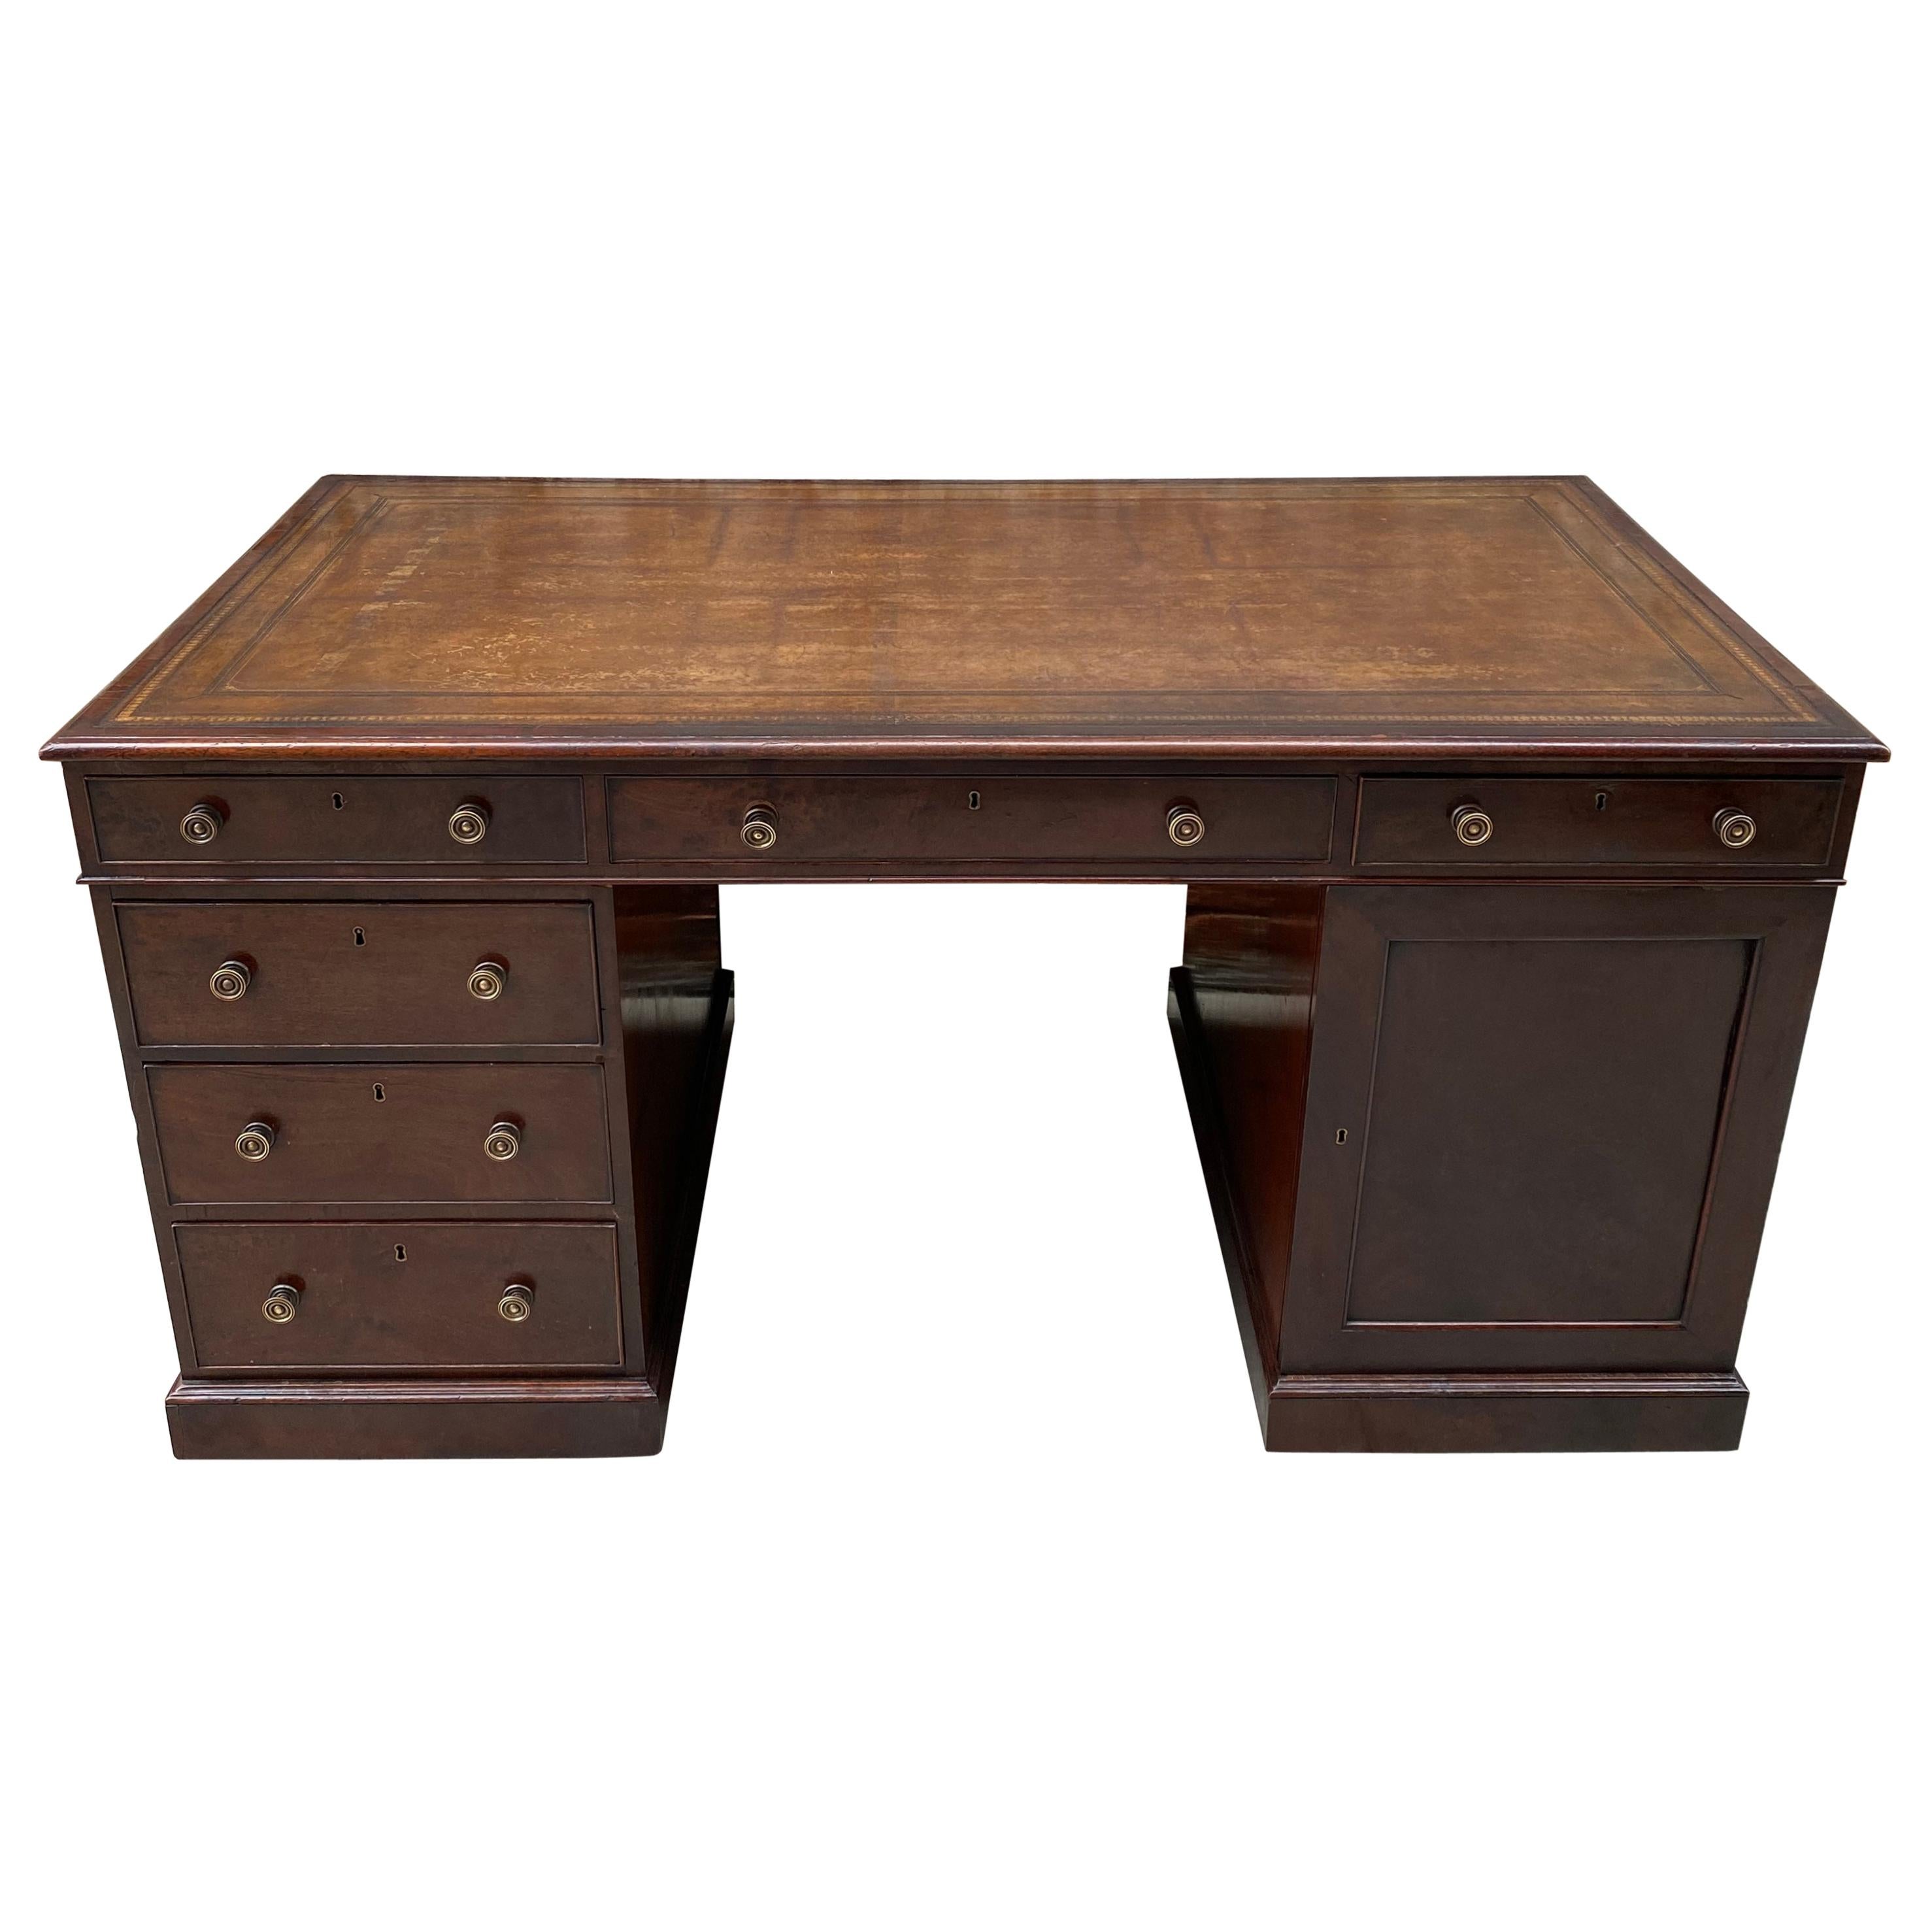 19th Century Mahogany Partners Desk with Tooled Leather Writing Surface